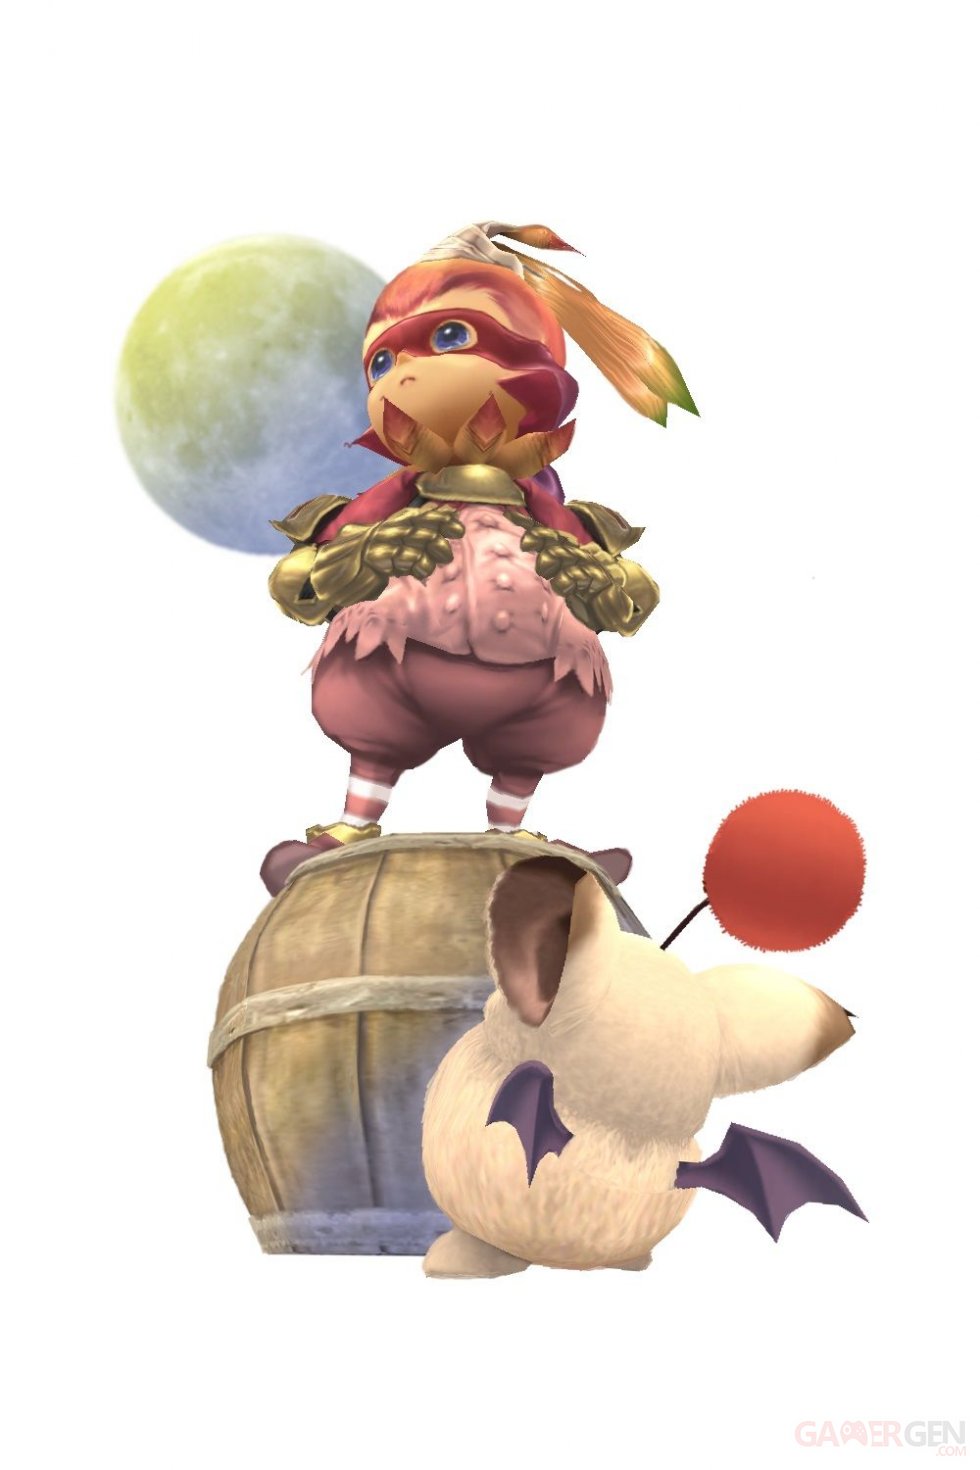 Final-Fantasy-Crystal-Chronicles-Remastered-Edition-17-13-09-2019